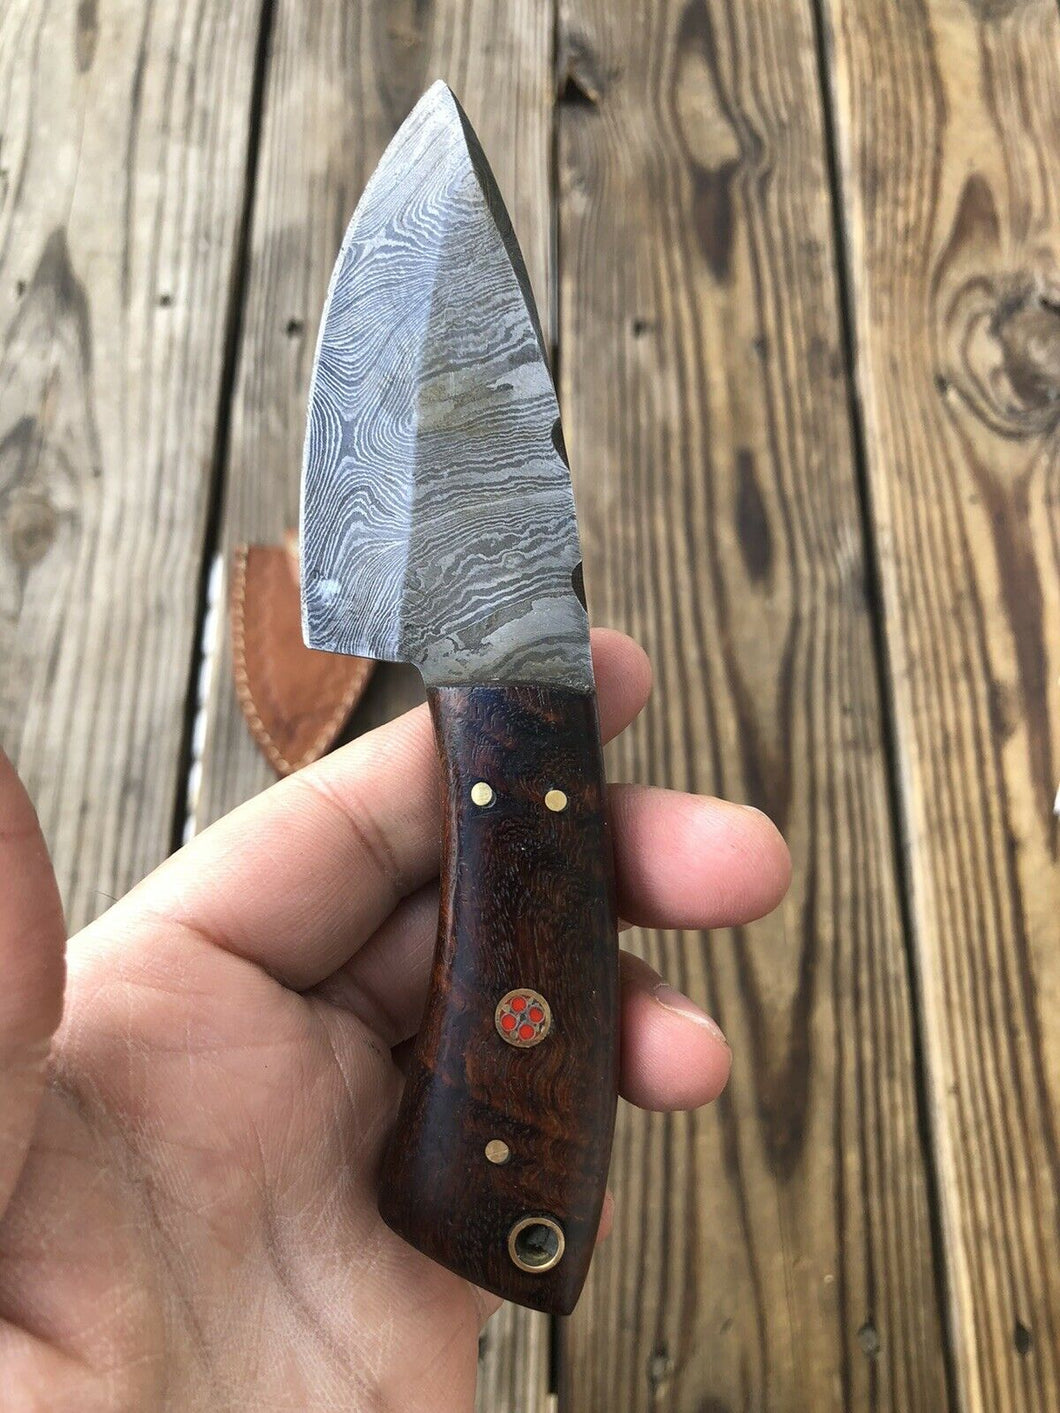 CUSTOM HAND FORGED DAMASCUS STEEL Skinning Knife W/ Rose Wood Handle - SUSA KNIVES